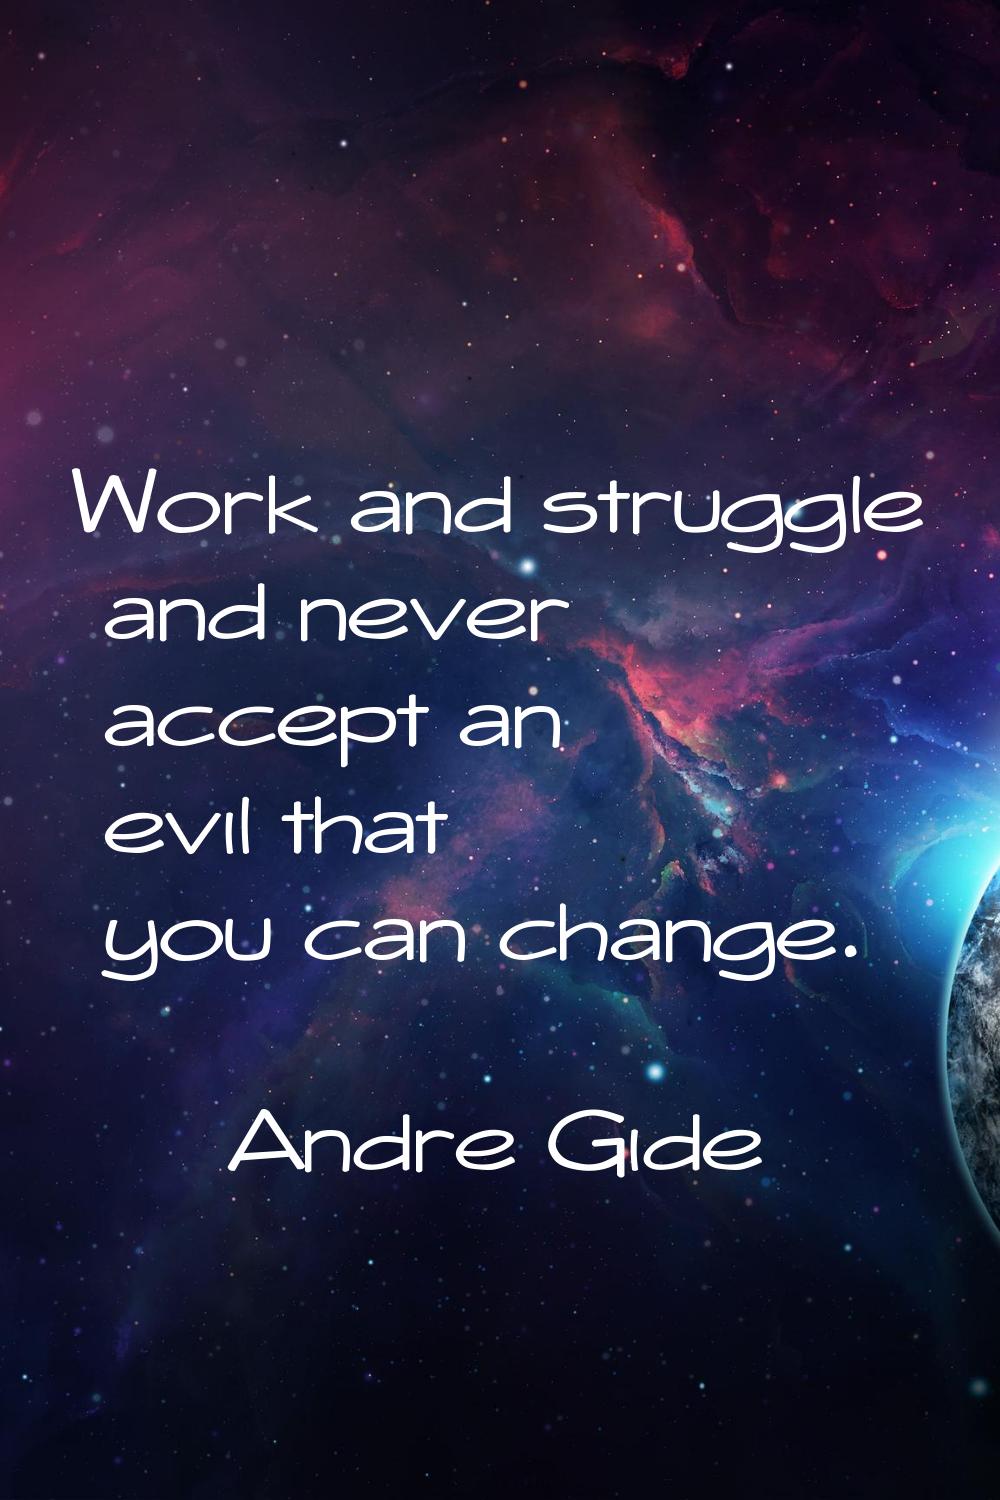 Work and struggle and never accept an evil that you can change.